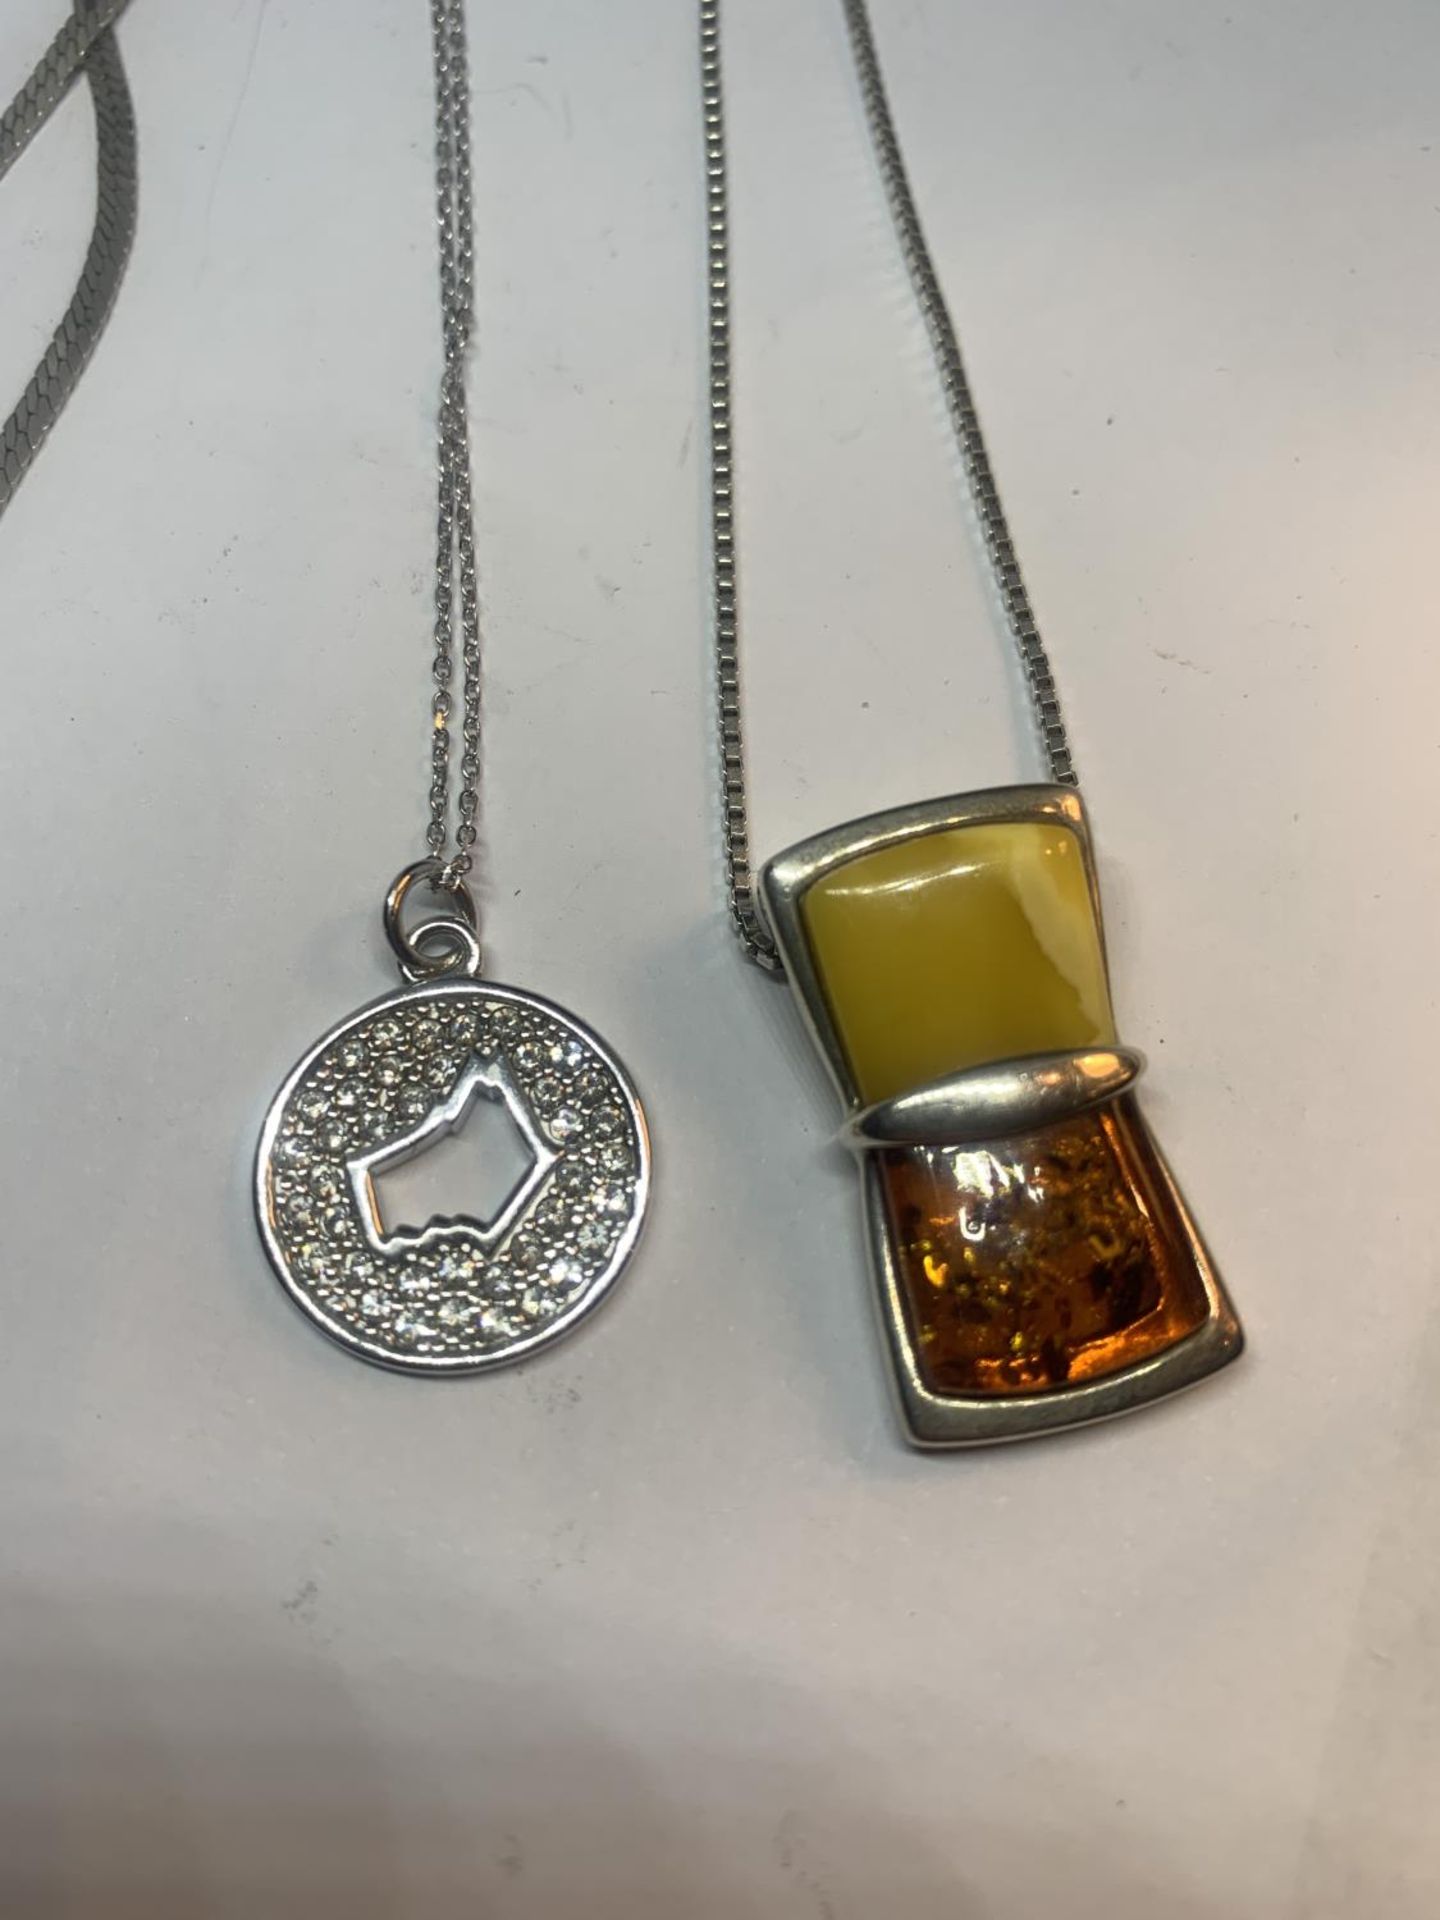 THREE SILVER NECKLACES WITH PENDANTS - Image 3 of 3